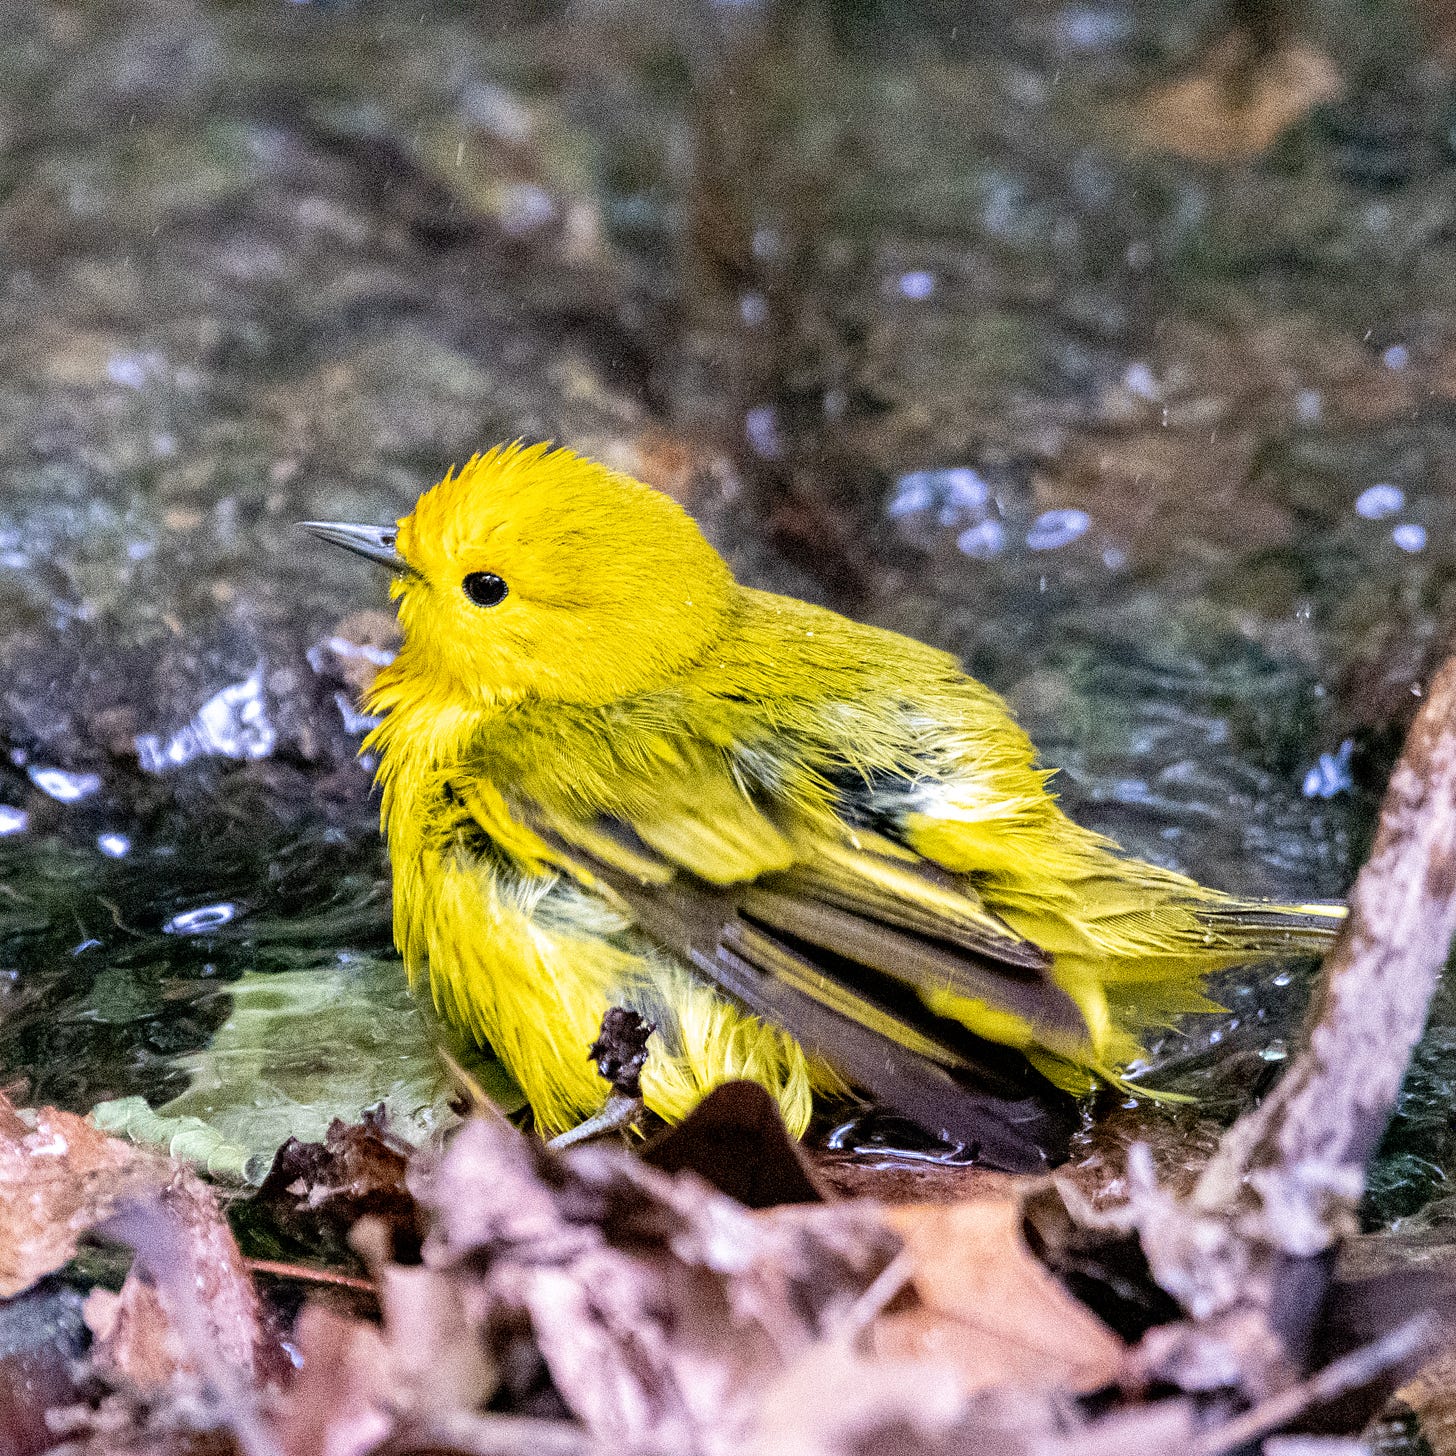 A yellow warbler in a creek, with ruffled, drying feathers